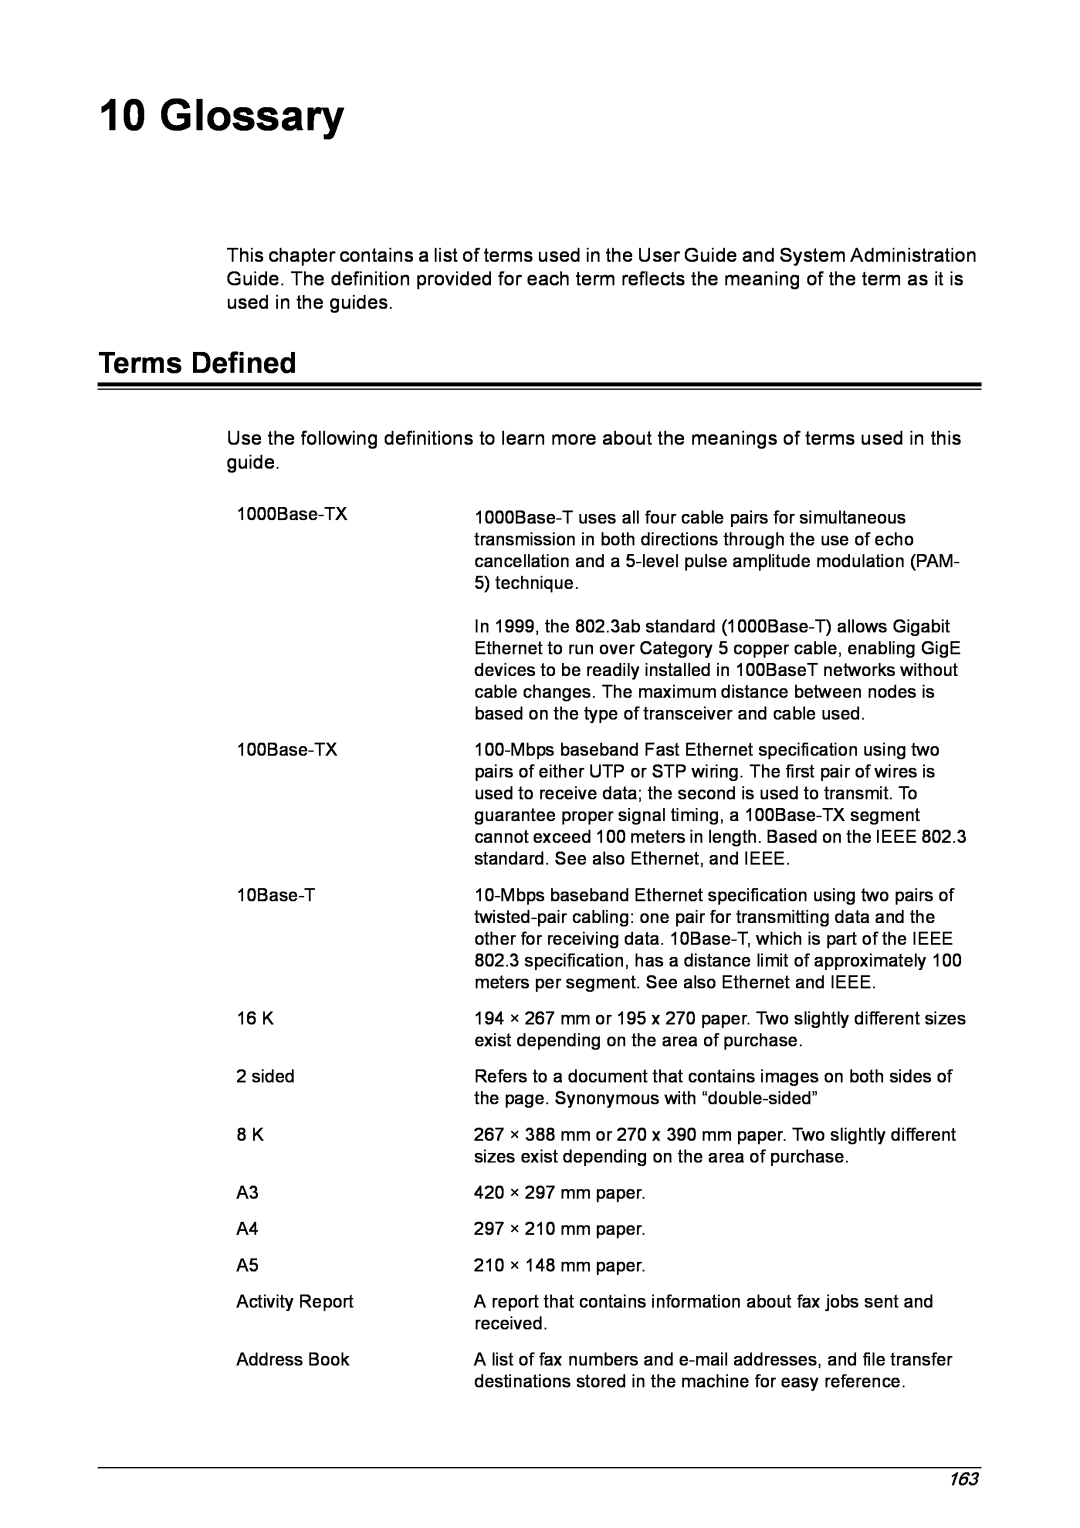 Xerox 5230 manual Glossary, Terms Defined 